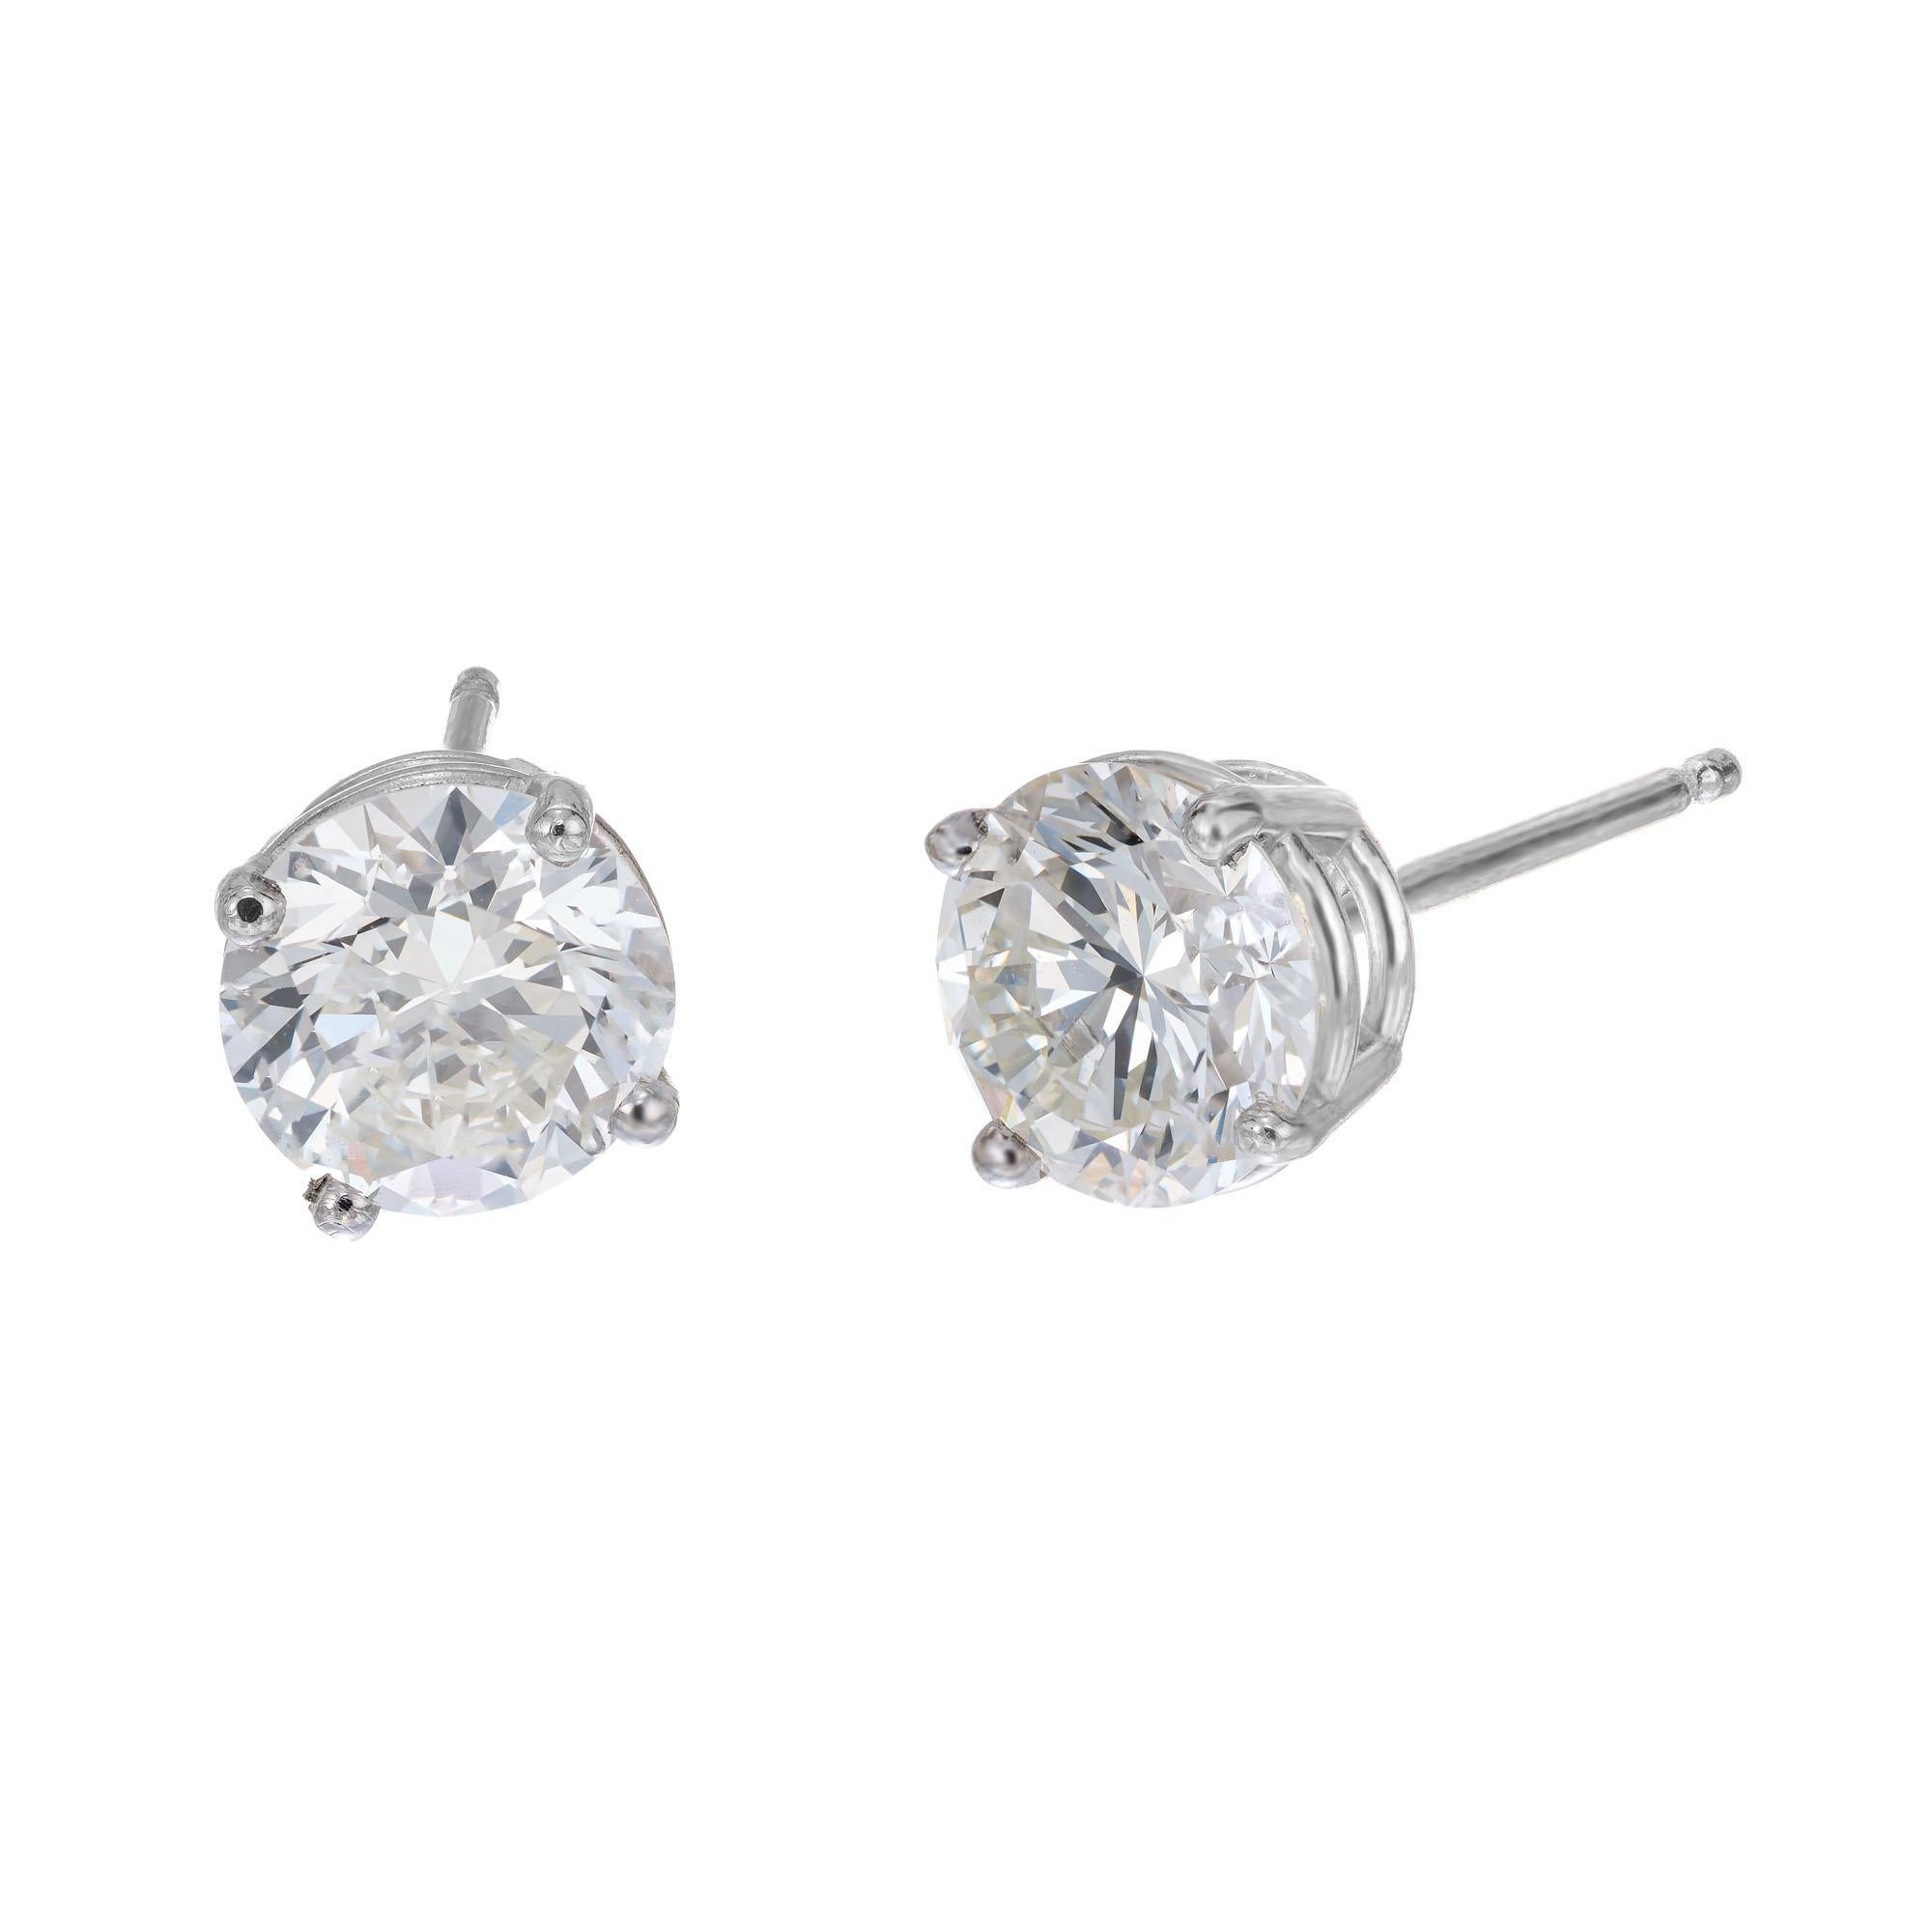 Peter Suchy GIA Certified 1.84 Carat Diamond Platinum Stud Earrings For Sale 1